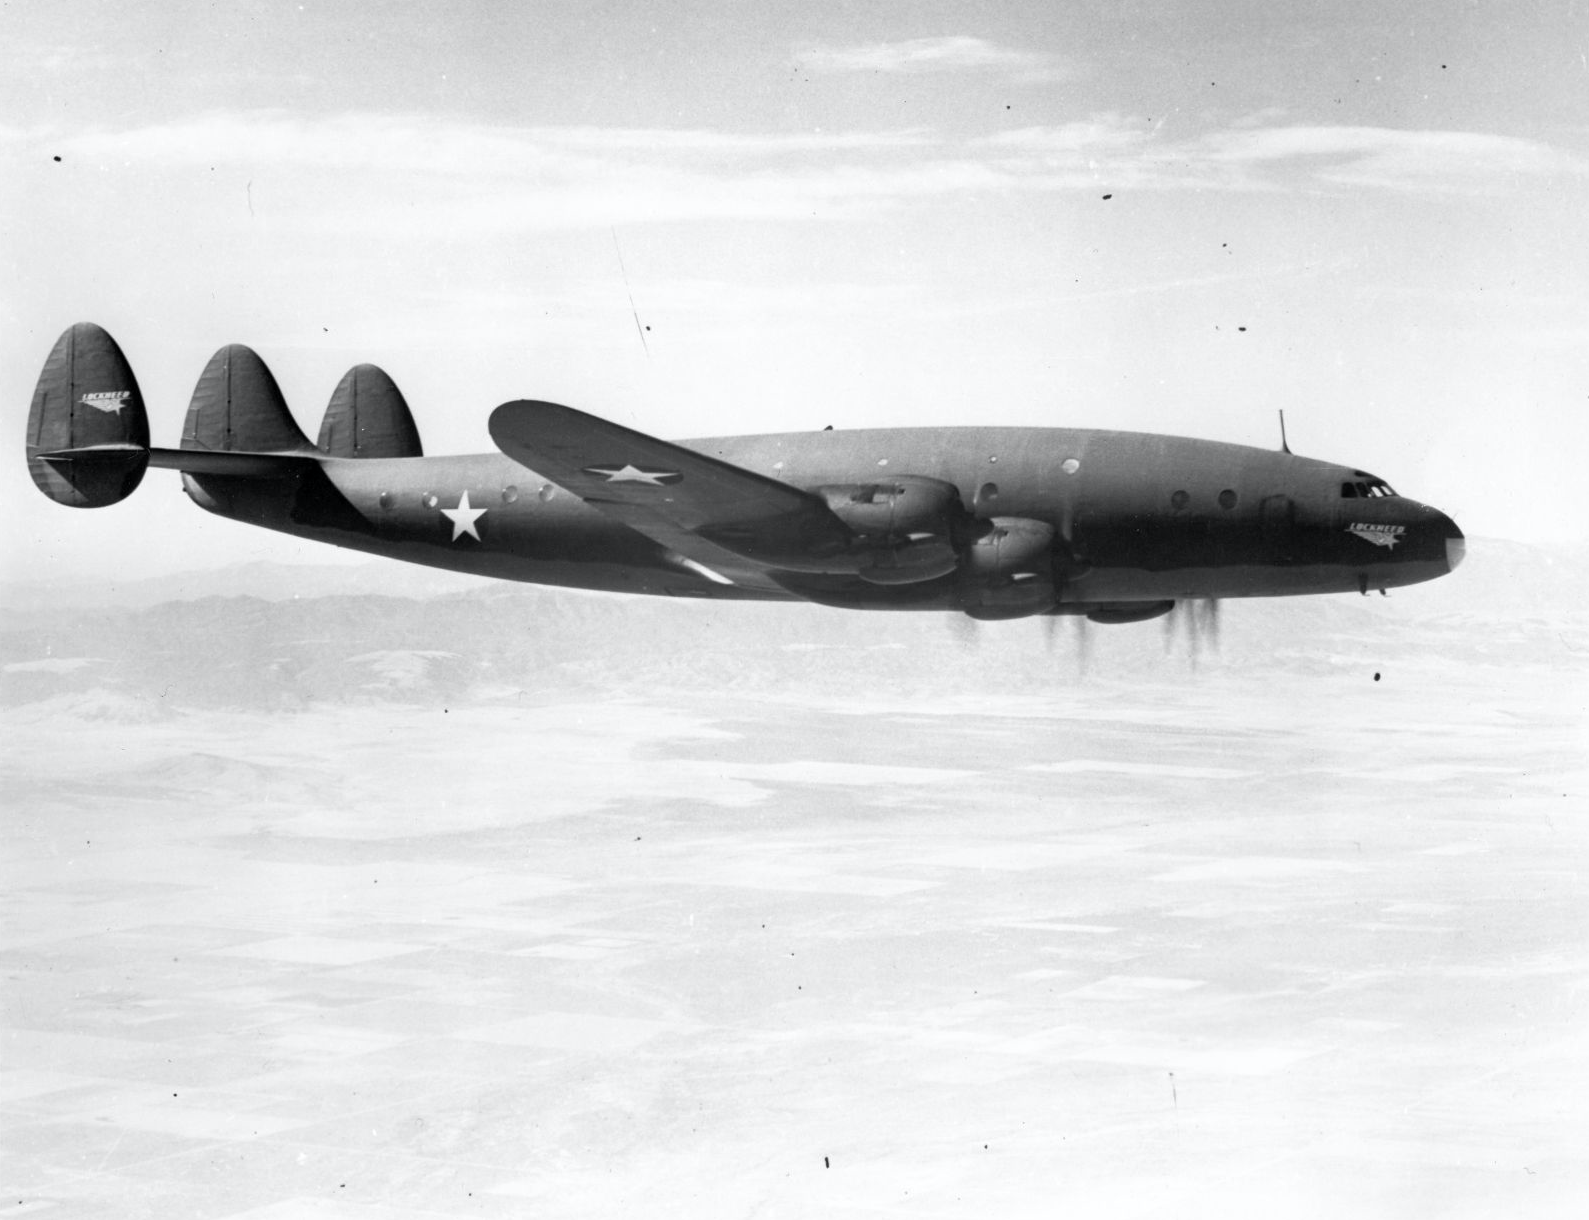 Lockheed L-049 Constellation NX25600 in flight. (San Diego Air and Space Museum Archive)